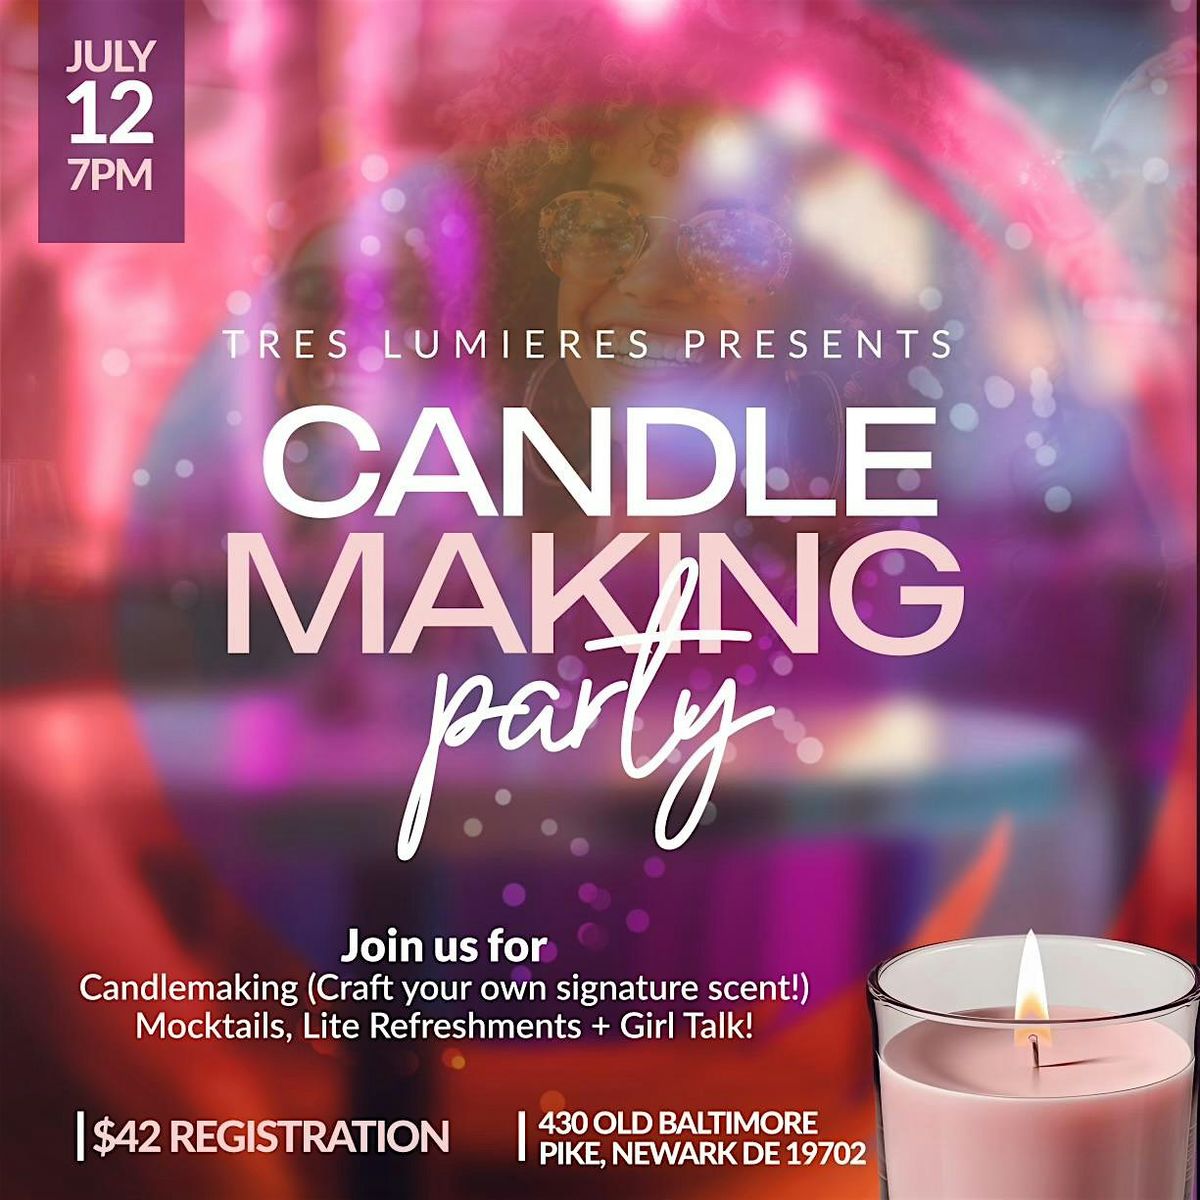 Candles, Mock-tails and Fun!!!